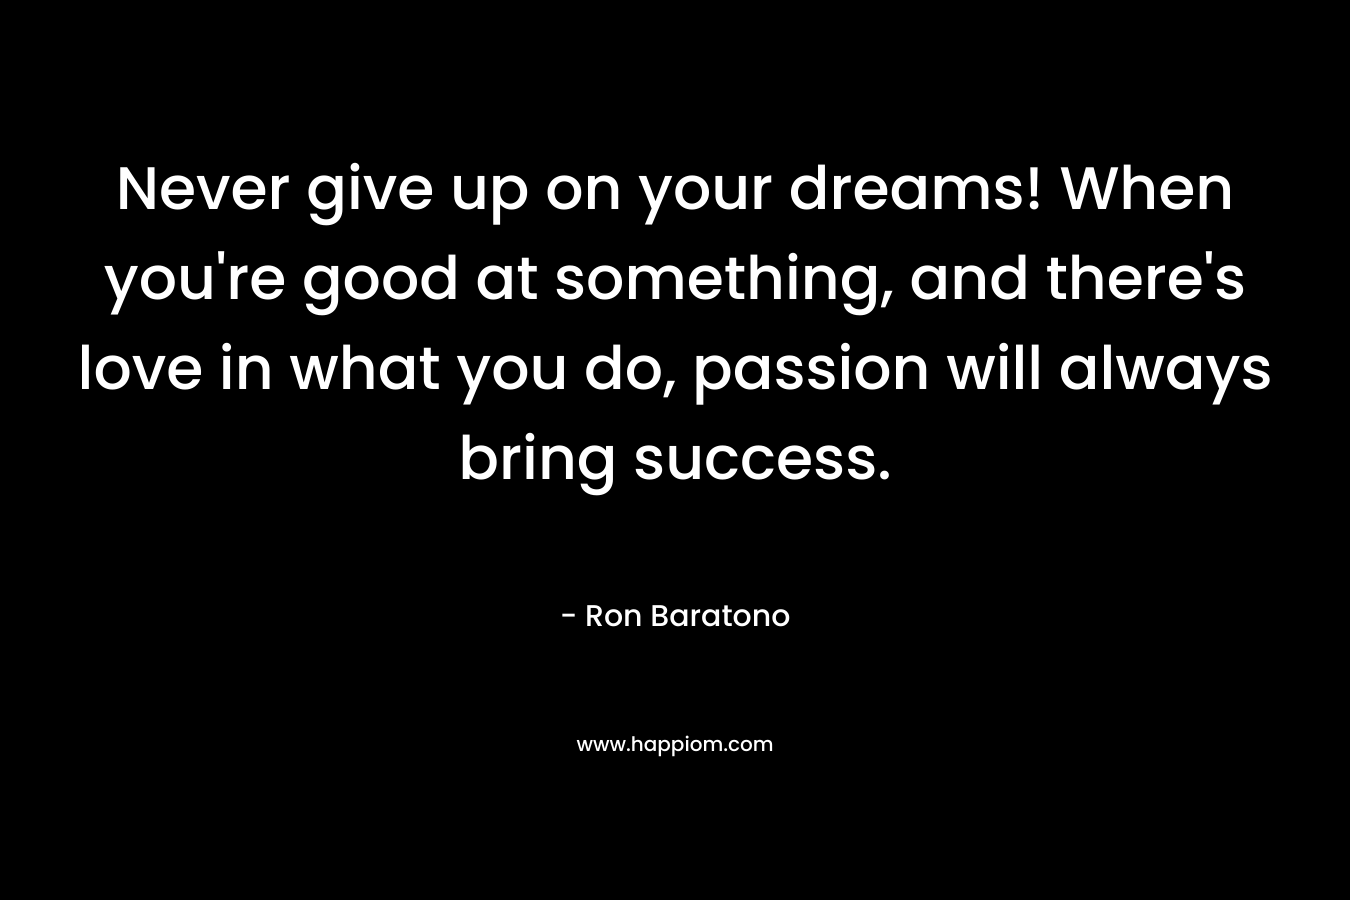 Never give up on your dreams! When you’re good at something, and there’s love in what you do, passion will always bring success. – Ron Baratono